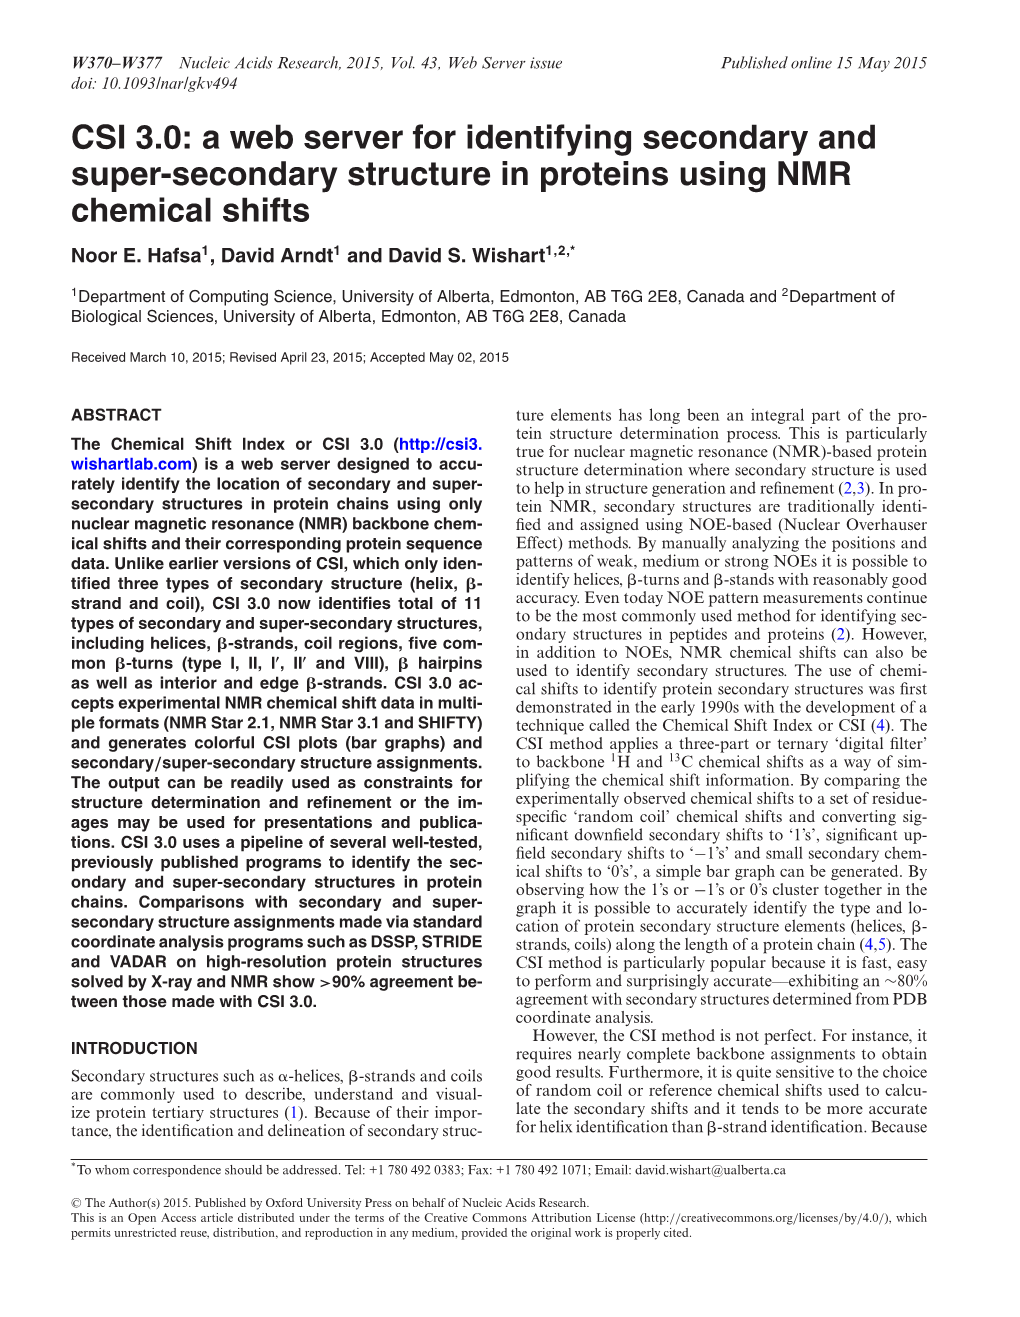 CSI 3.0: a Web Server for Identifying Secondary and Super-Secondary Structure in Proteins Using NMR Chemical Shifts Noor E